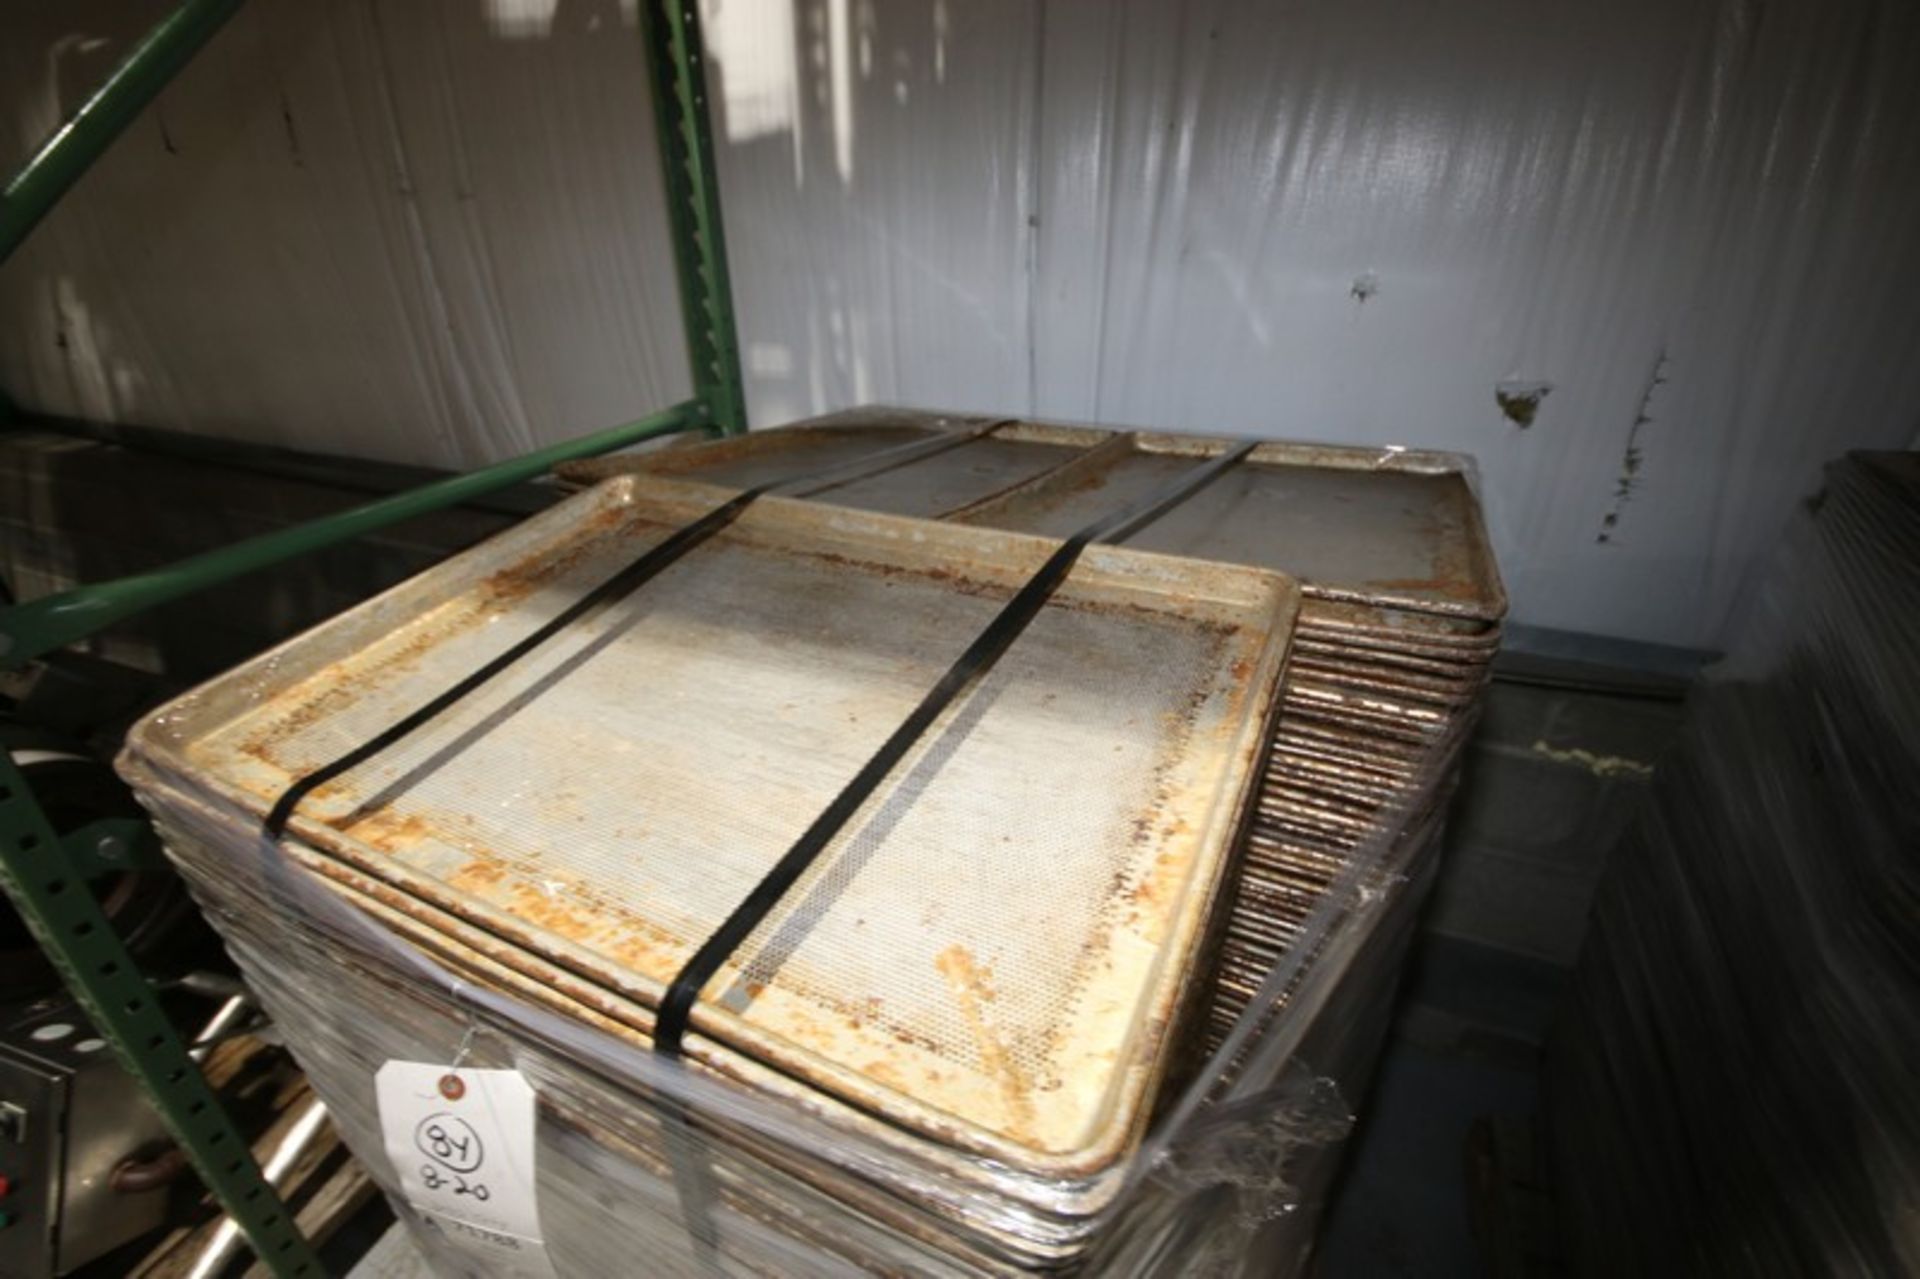 Lot of Aprox. 340 Baking Pans, Internal Dims.: Aprox. 25" L x 17" W (INV#71788)(Located at the MDG - Image 3 of 3